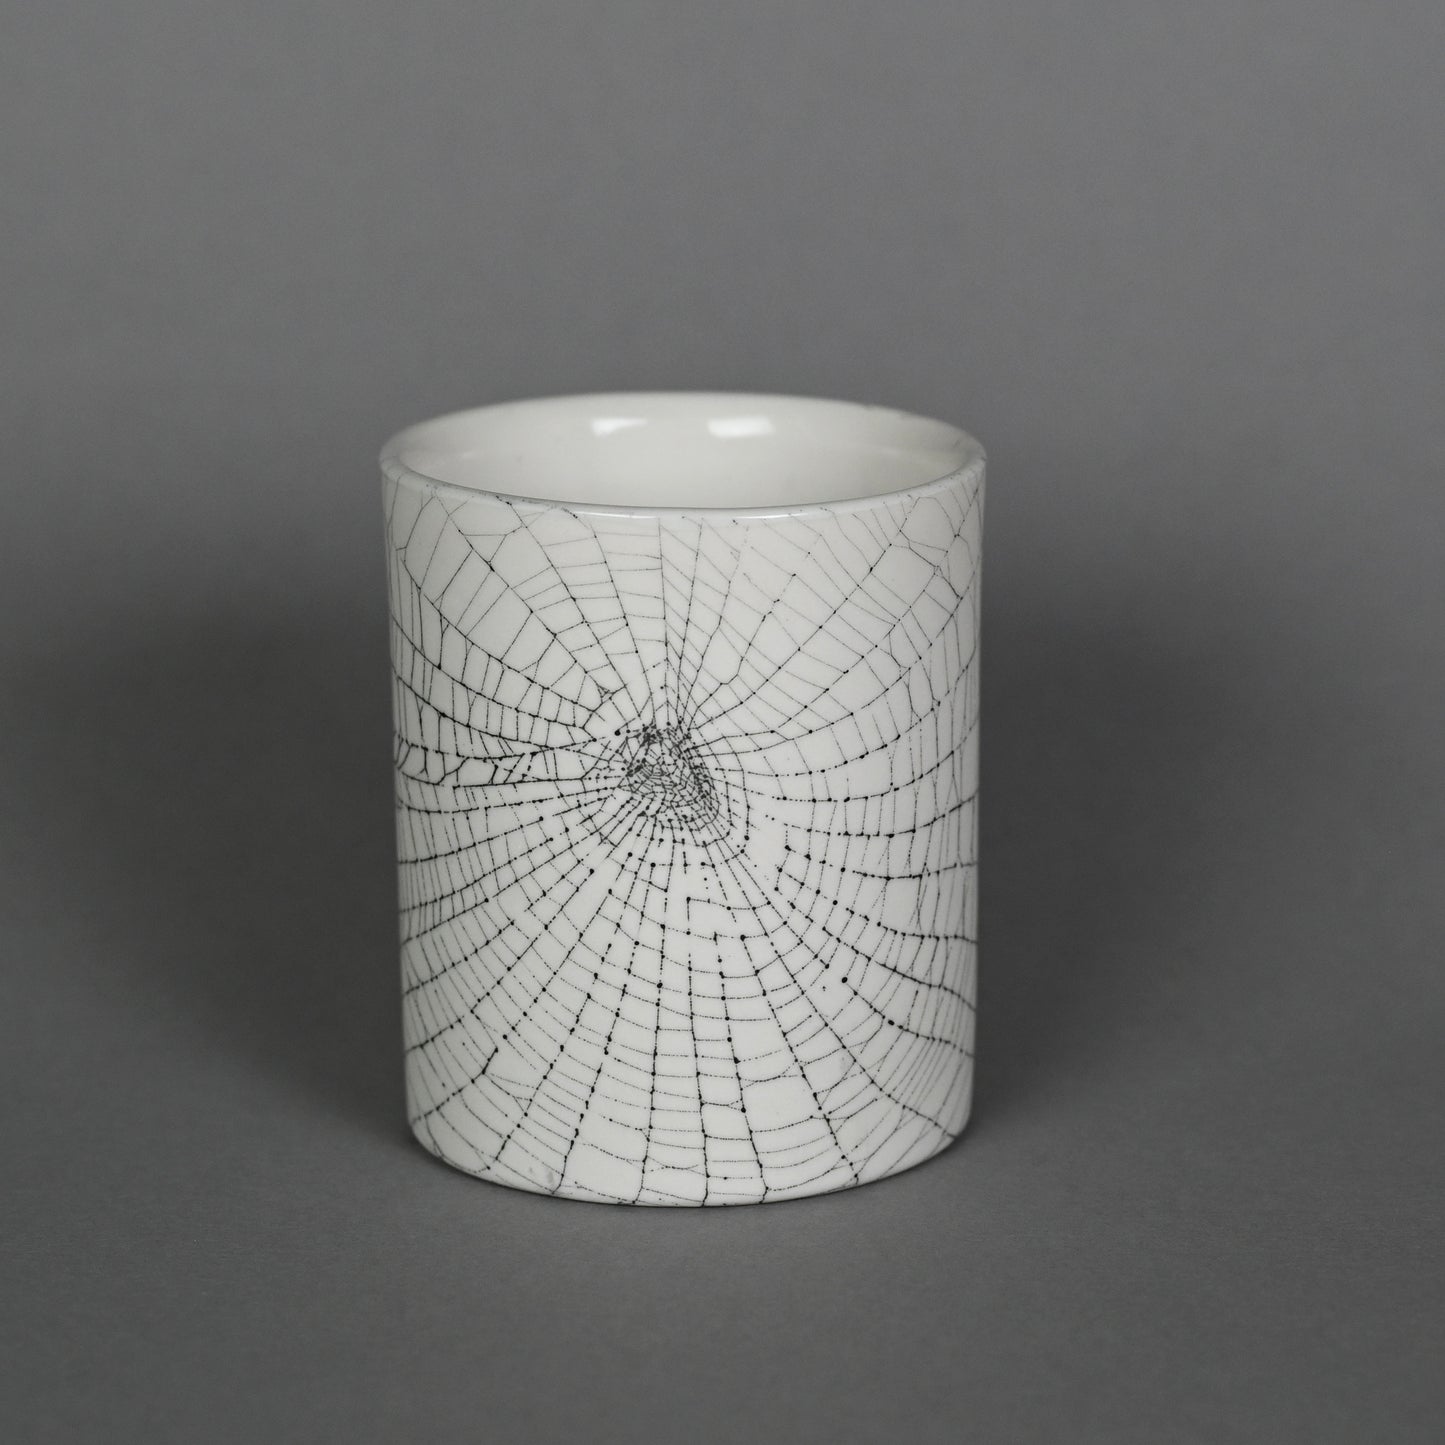 Web on Clay (211), Collected September 30, 2022